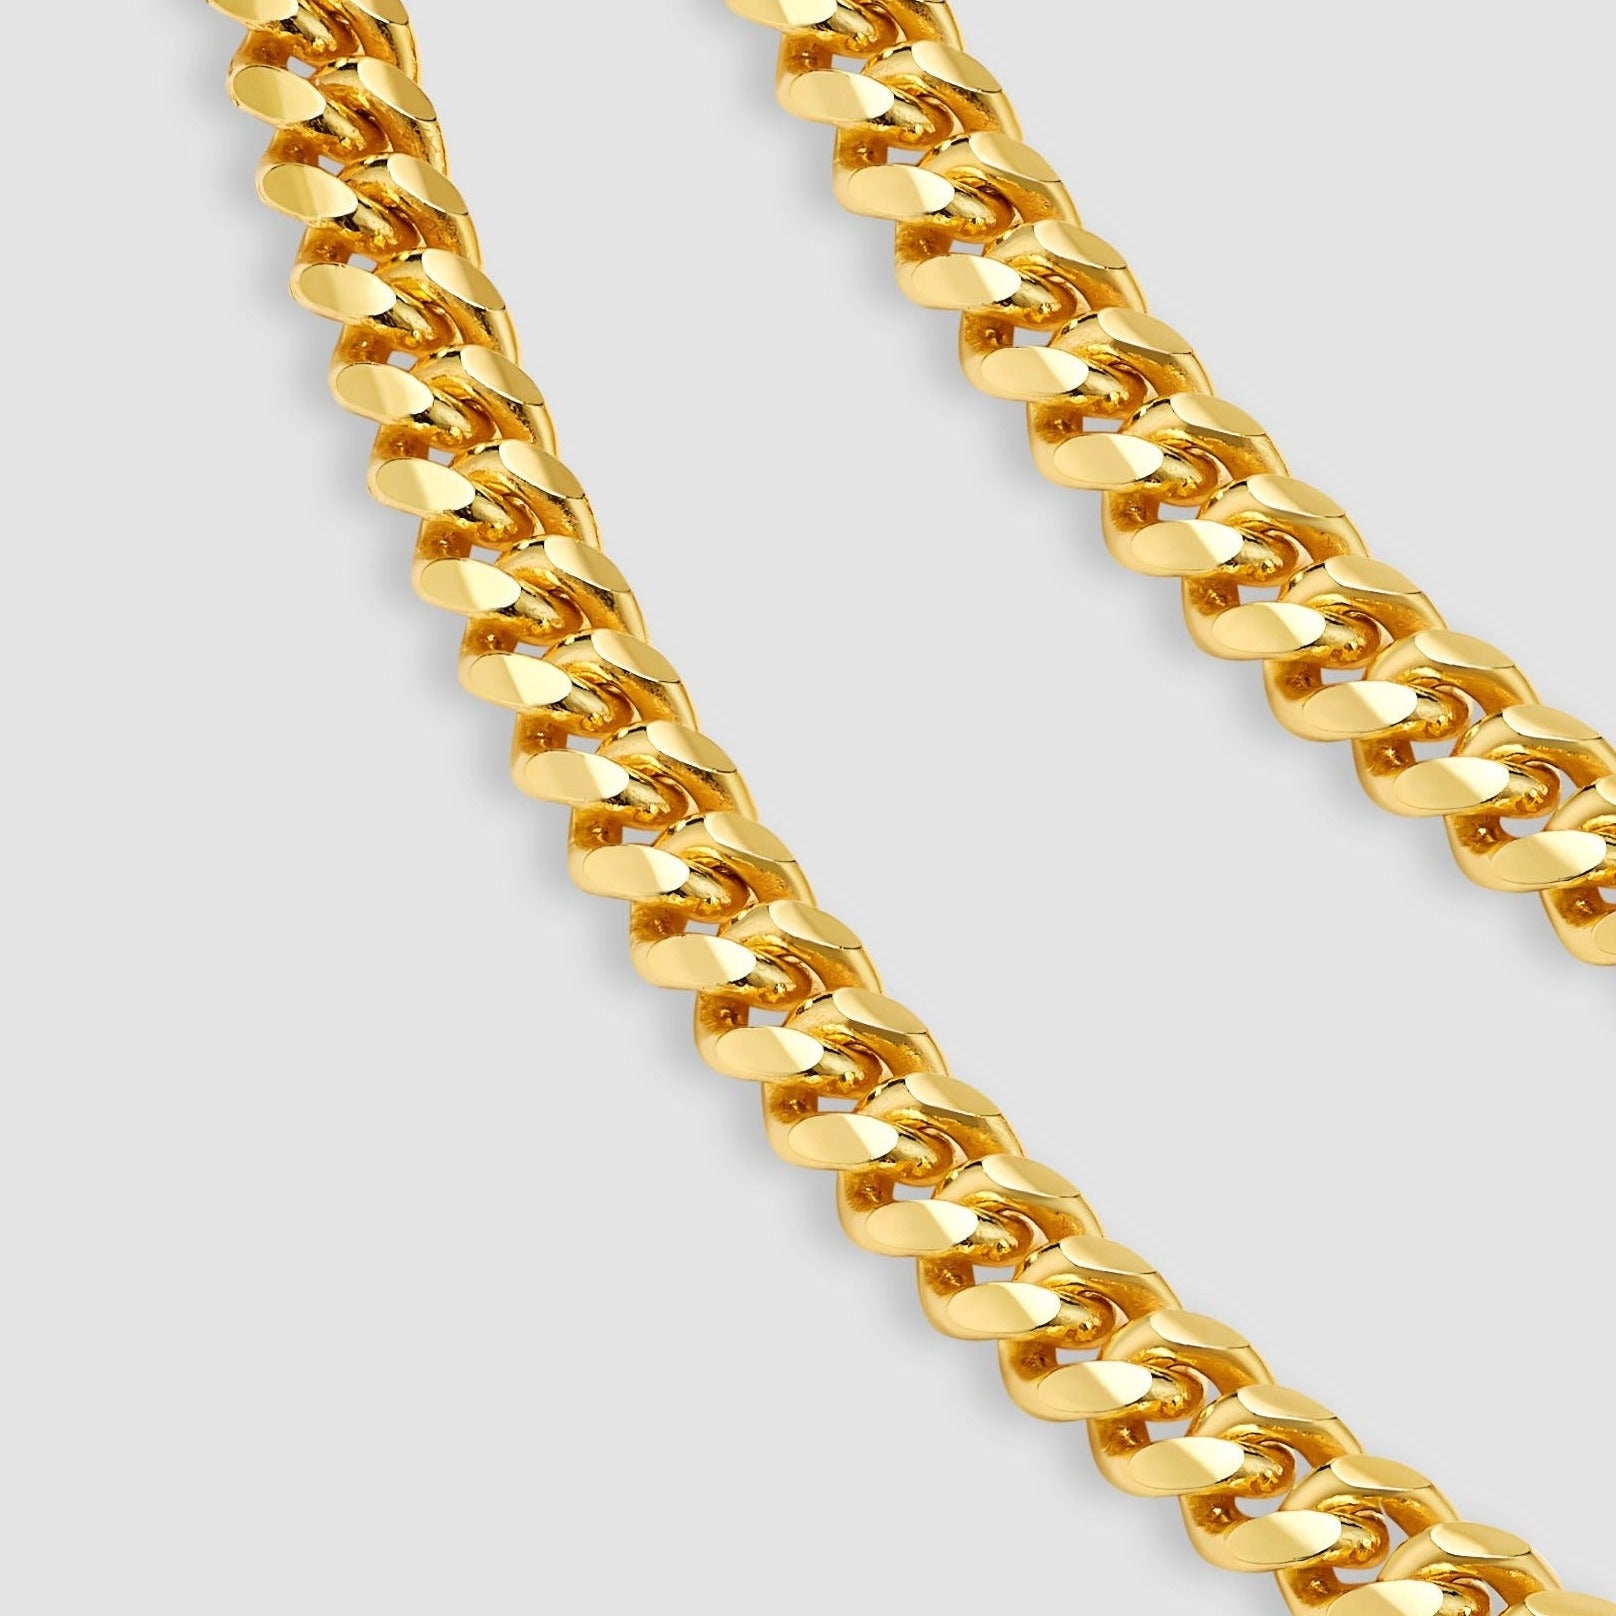 Doves by Doron Paloma Small Cuban Link Chain Necklace, 4mm, 18 Inches